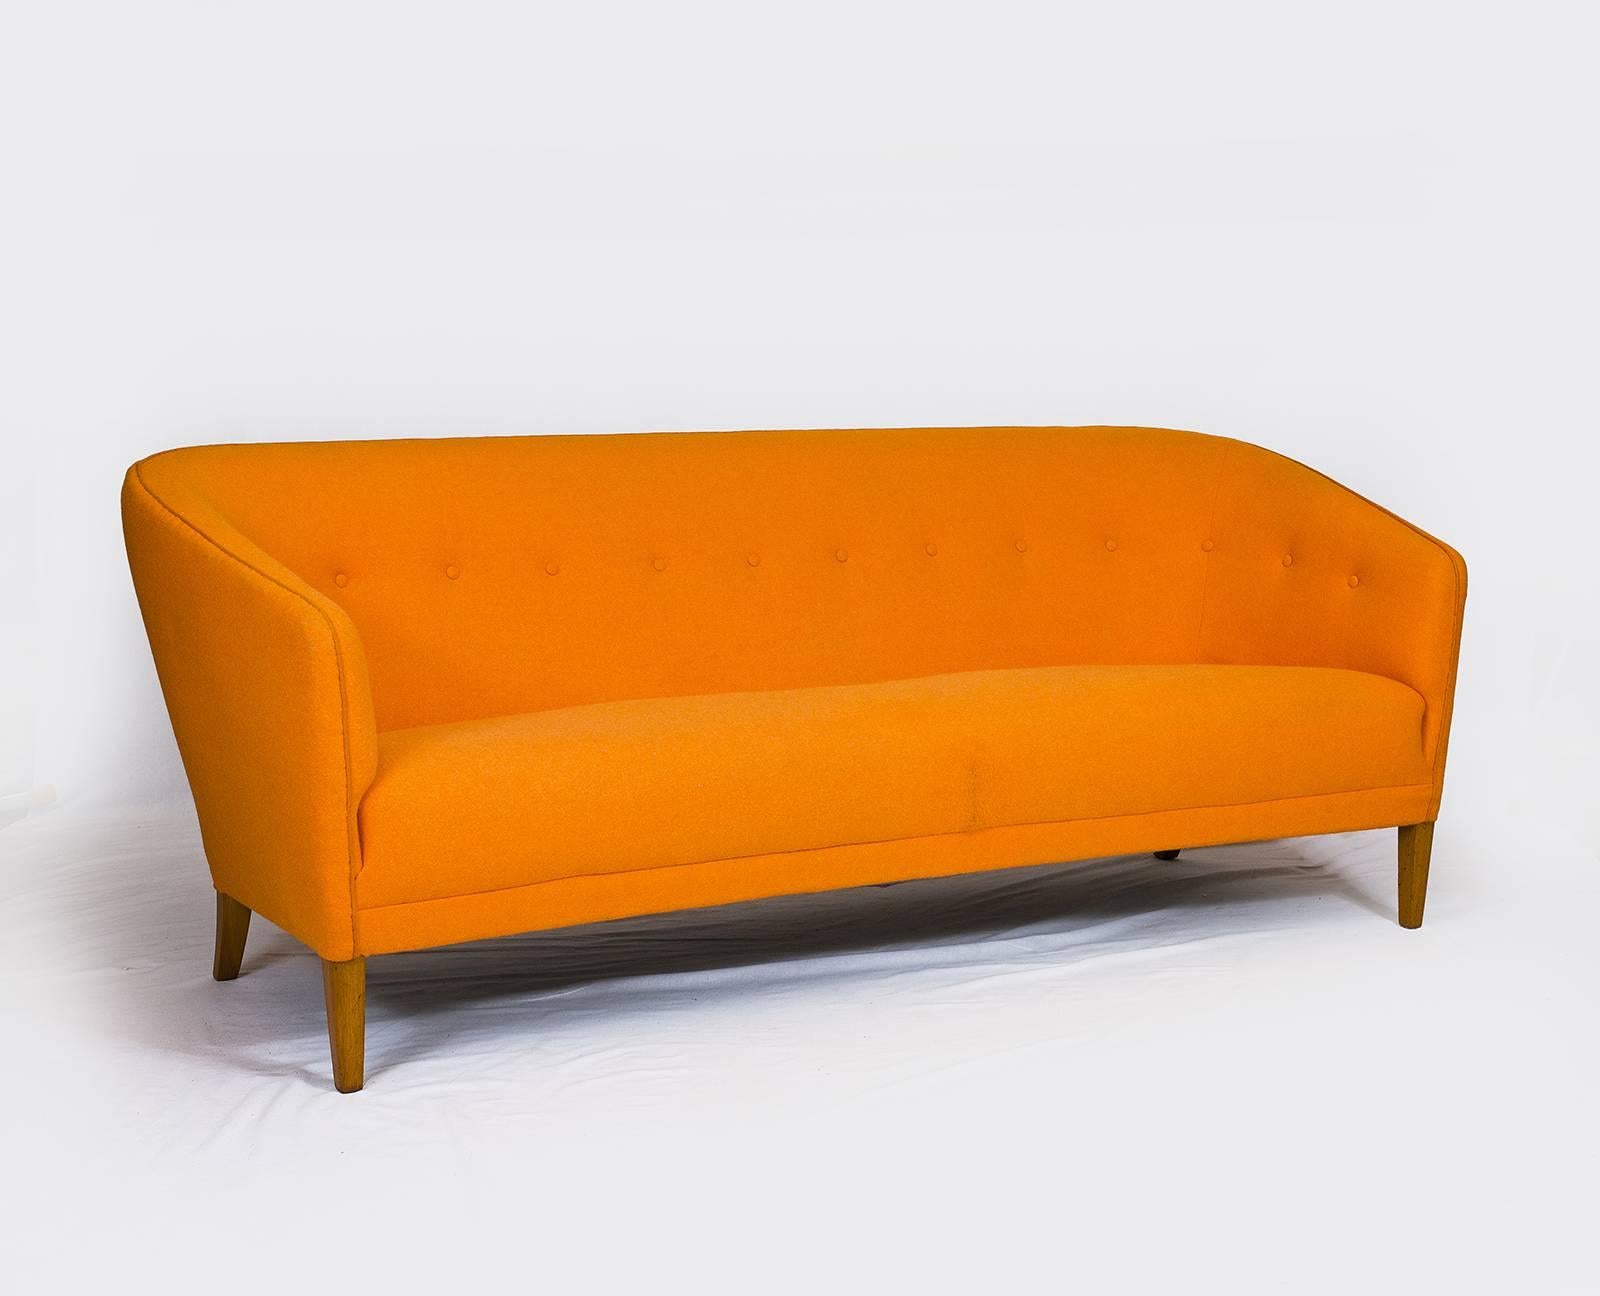 Ludvig Pontoppidan sofa from the 1940s.    Store formerly known as ARTFUL DODGER INC